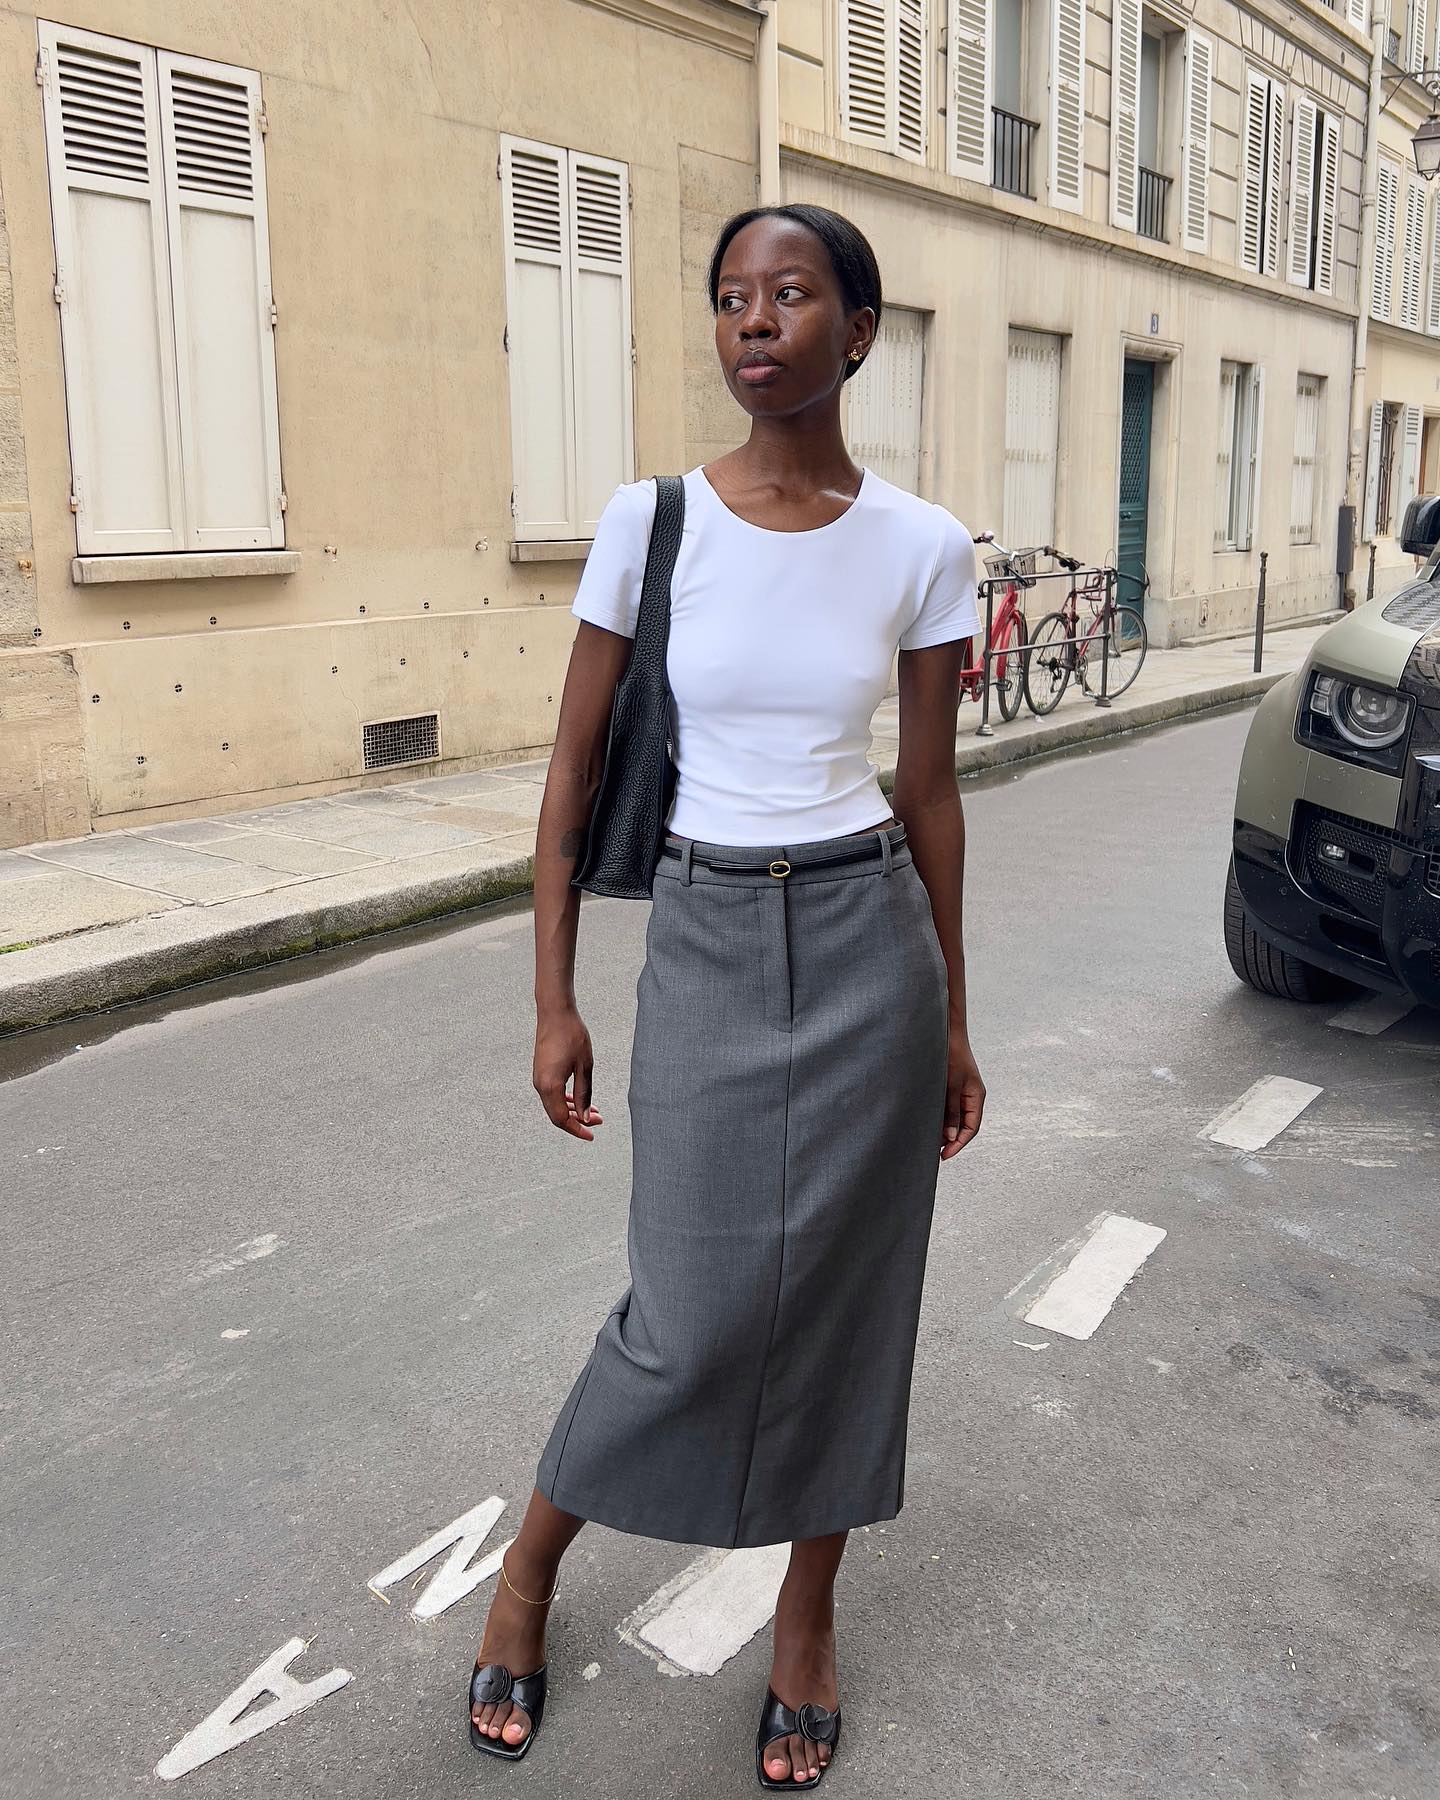 Sylvie Mus styles a grey pencil skirt with a whit t-shirt and mules.